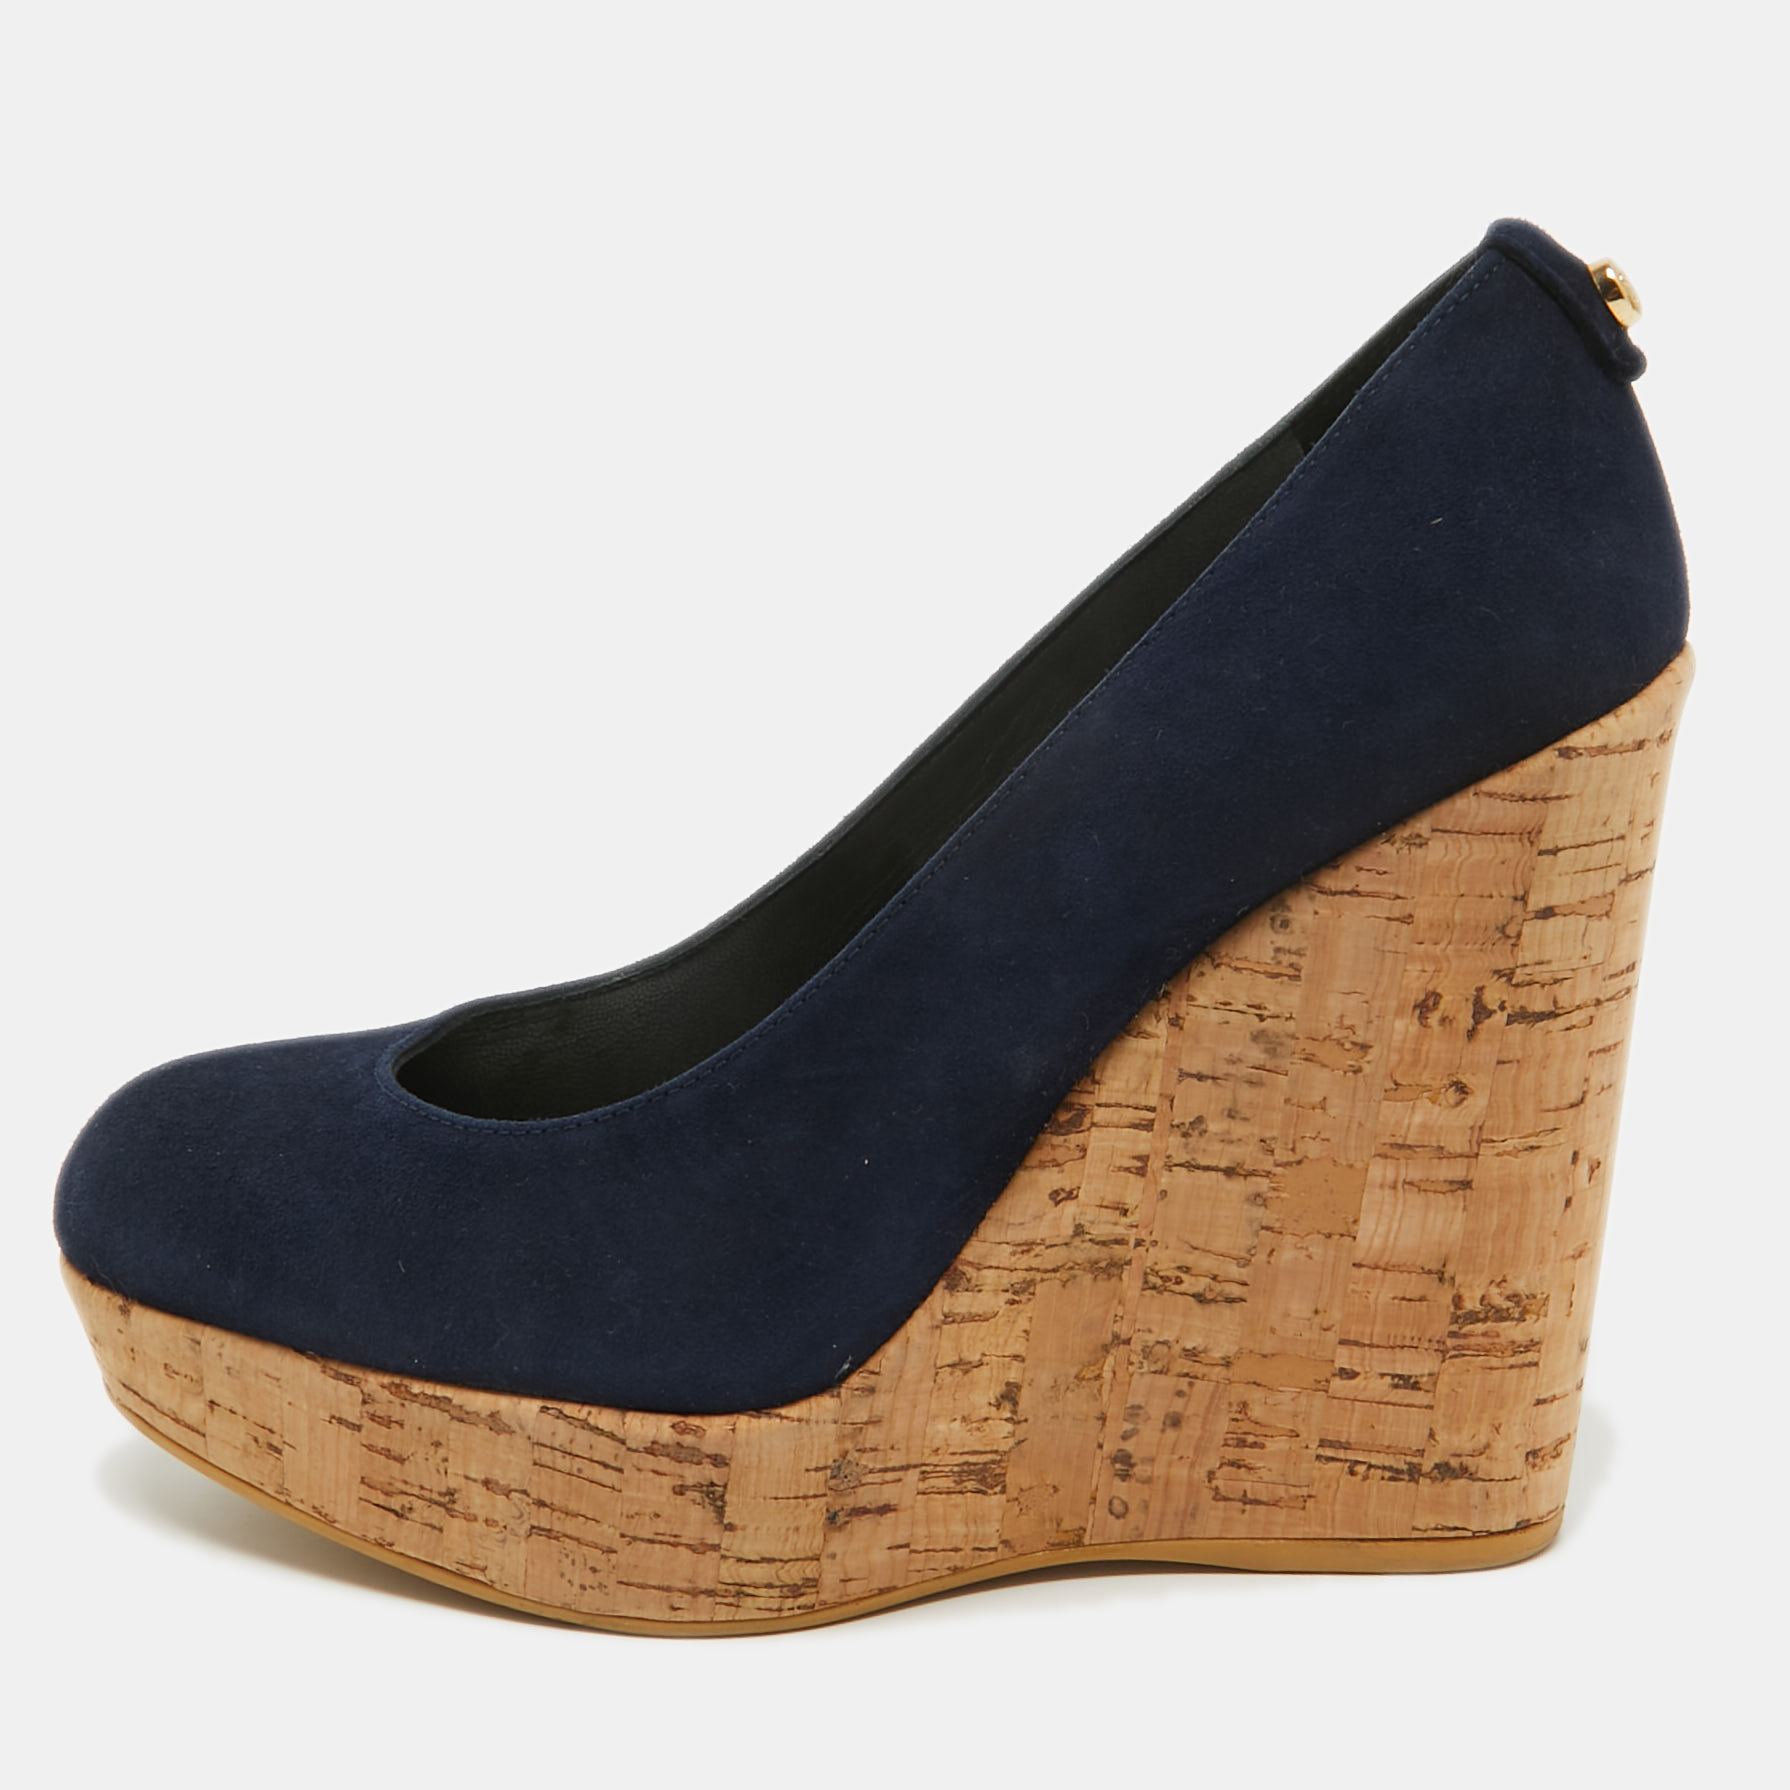 

Stuart Weitzman x Russell Bromley Navy Blue Suede Corkswoon Wedge Pumps Size